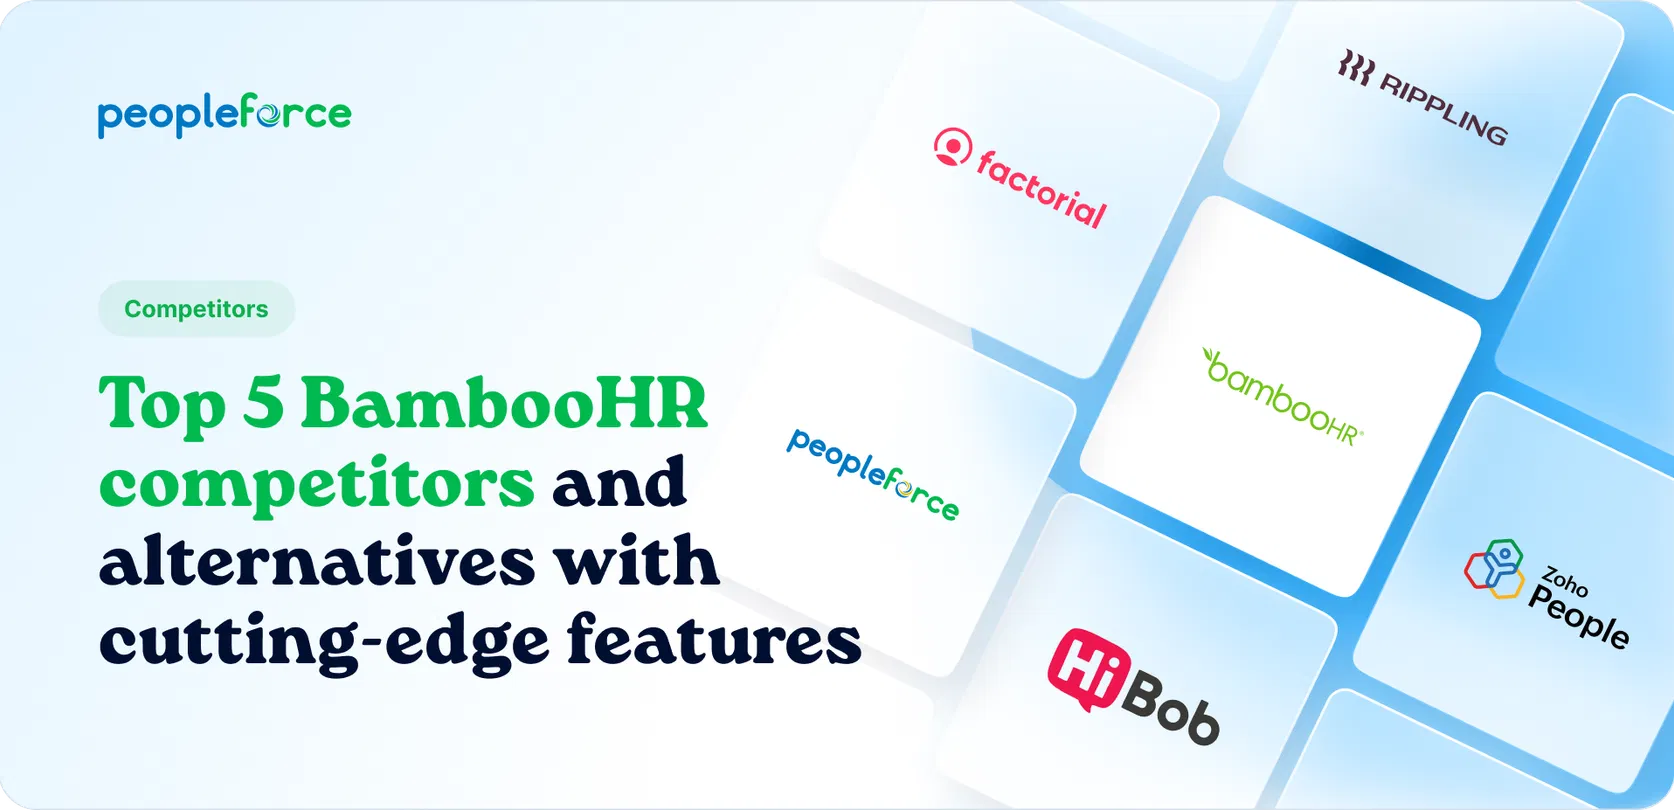 Top 5 BambooHR competitors and alternatives with cutting-edge features